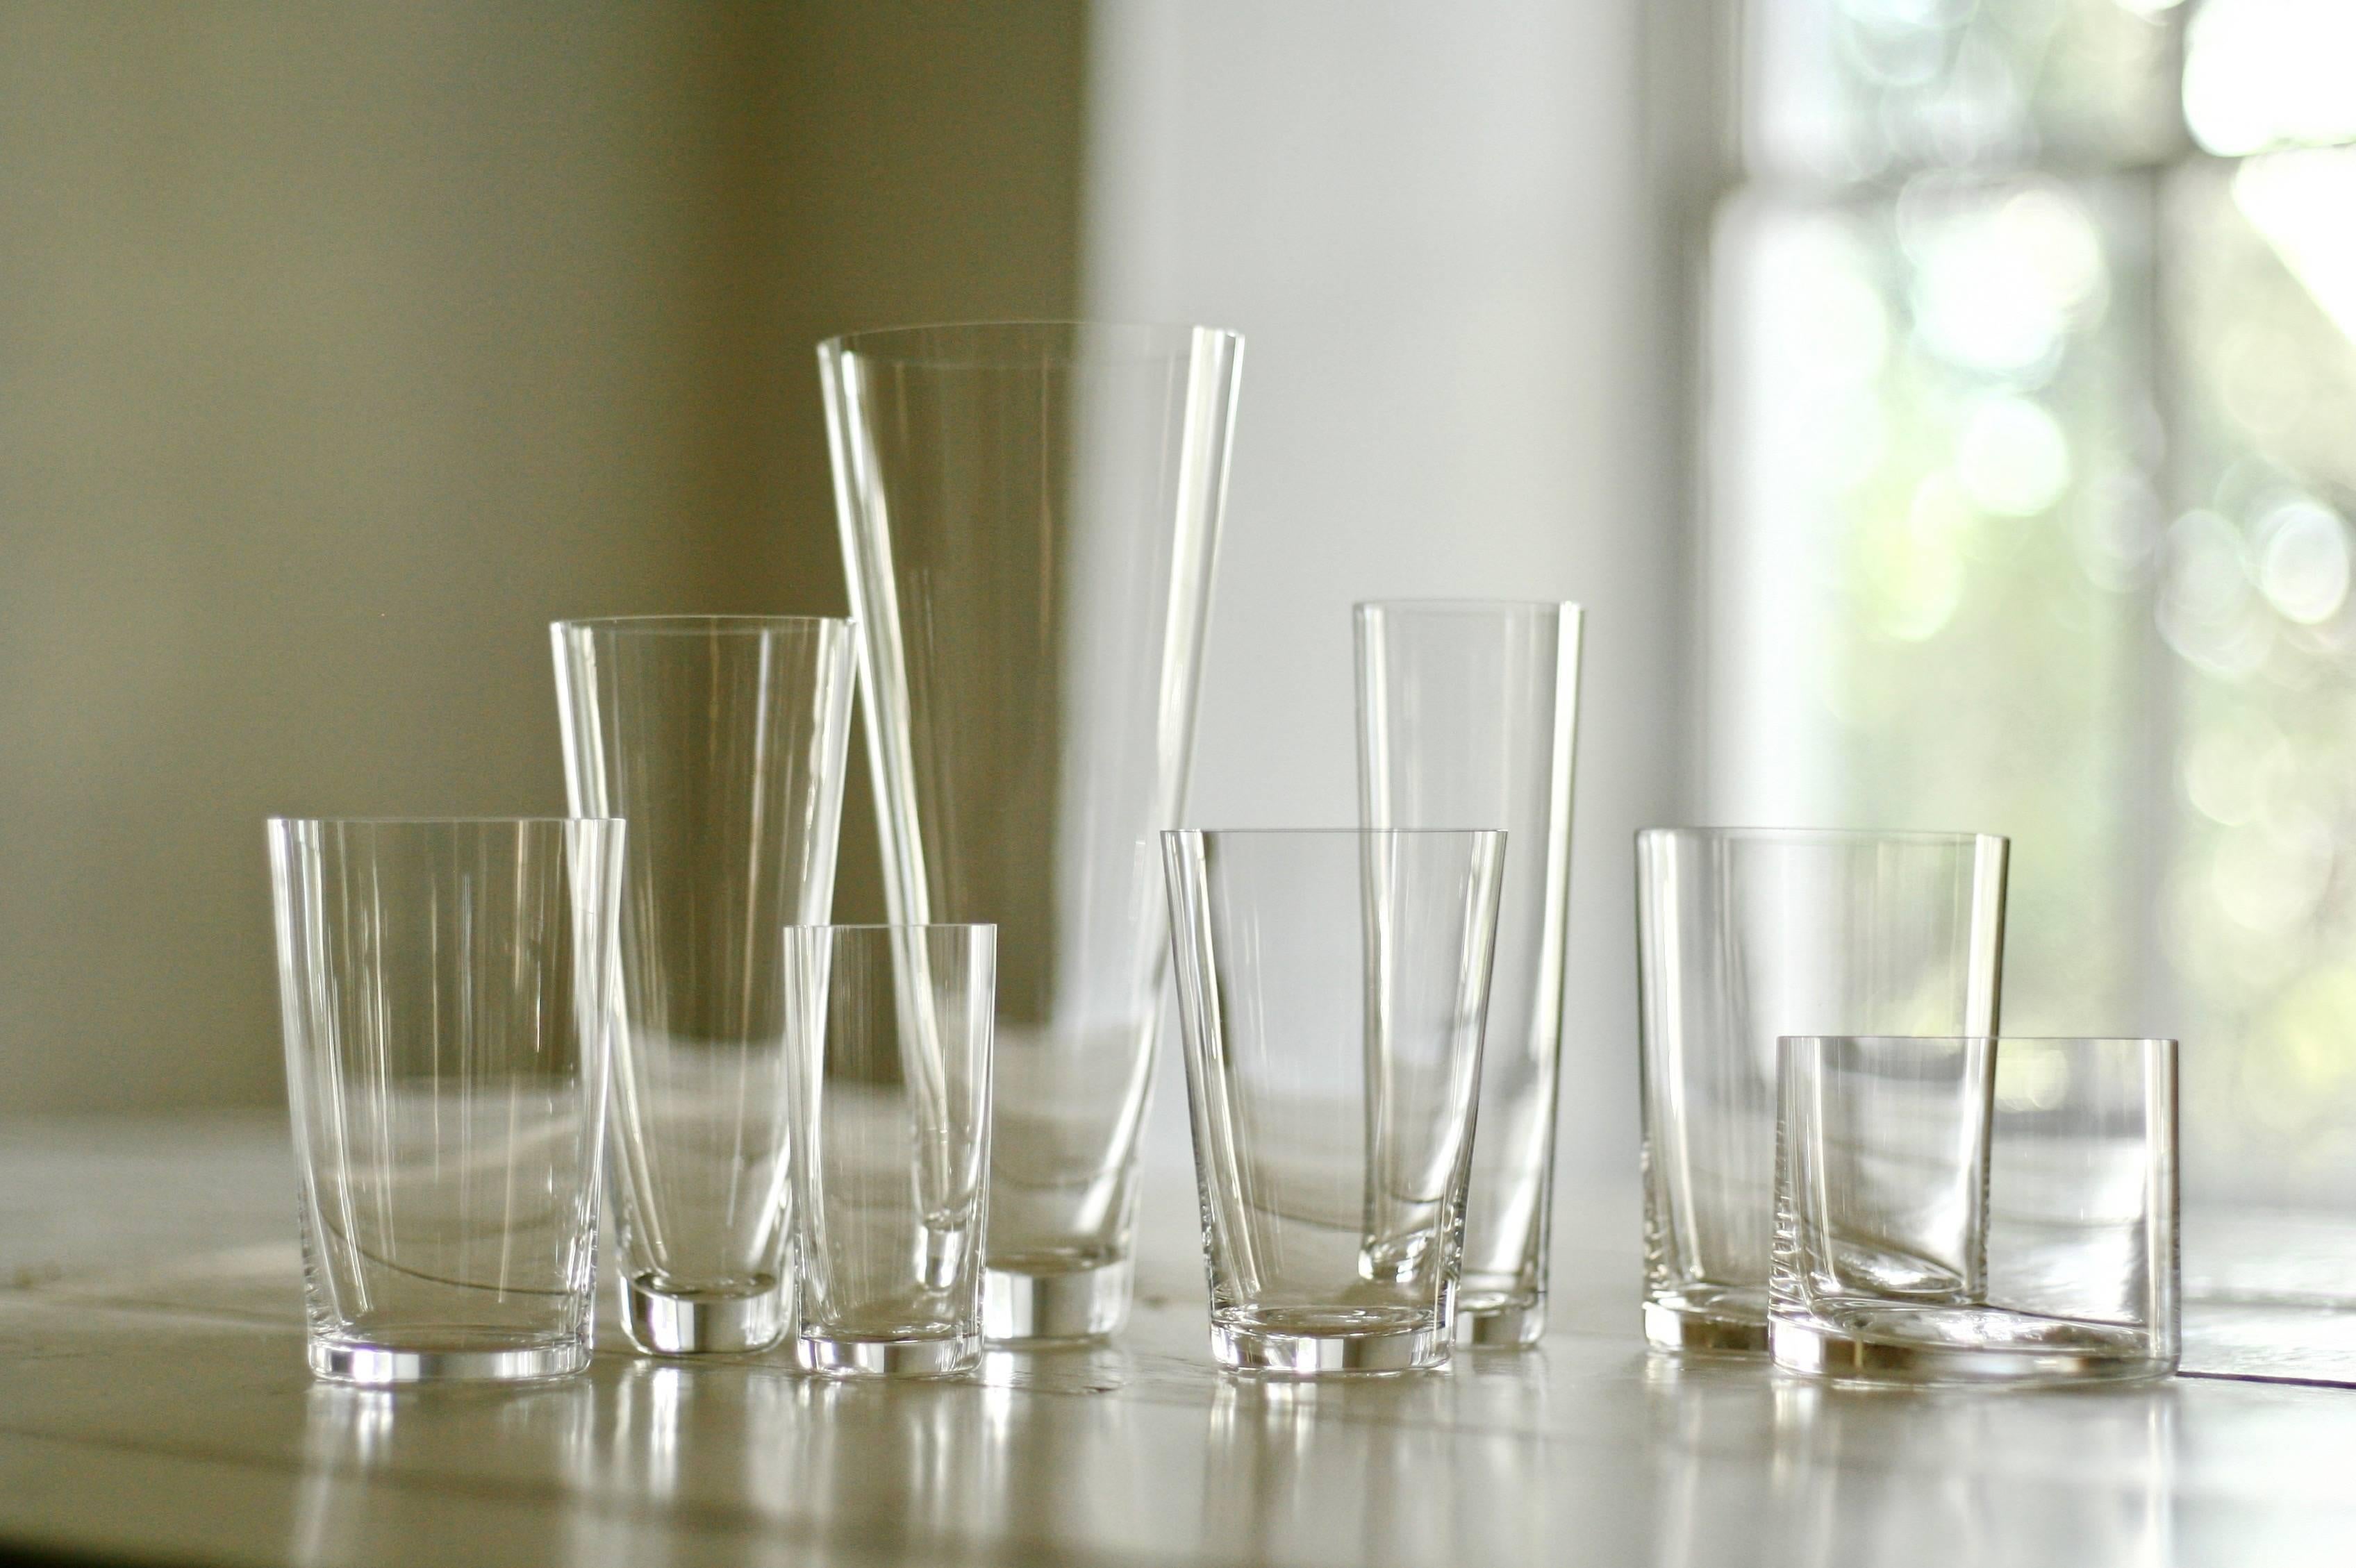 Launched with Takashimaya in 1999, these handblown crystal cocktail glasses have become a modern Classic. Each Deborah Ehrlich piece is designed for the extraordinary strength and clarity of Swedish crystal. The simplicity of the design, the